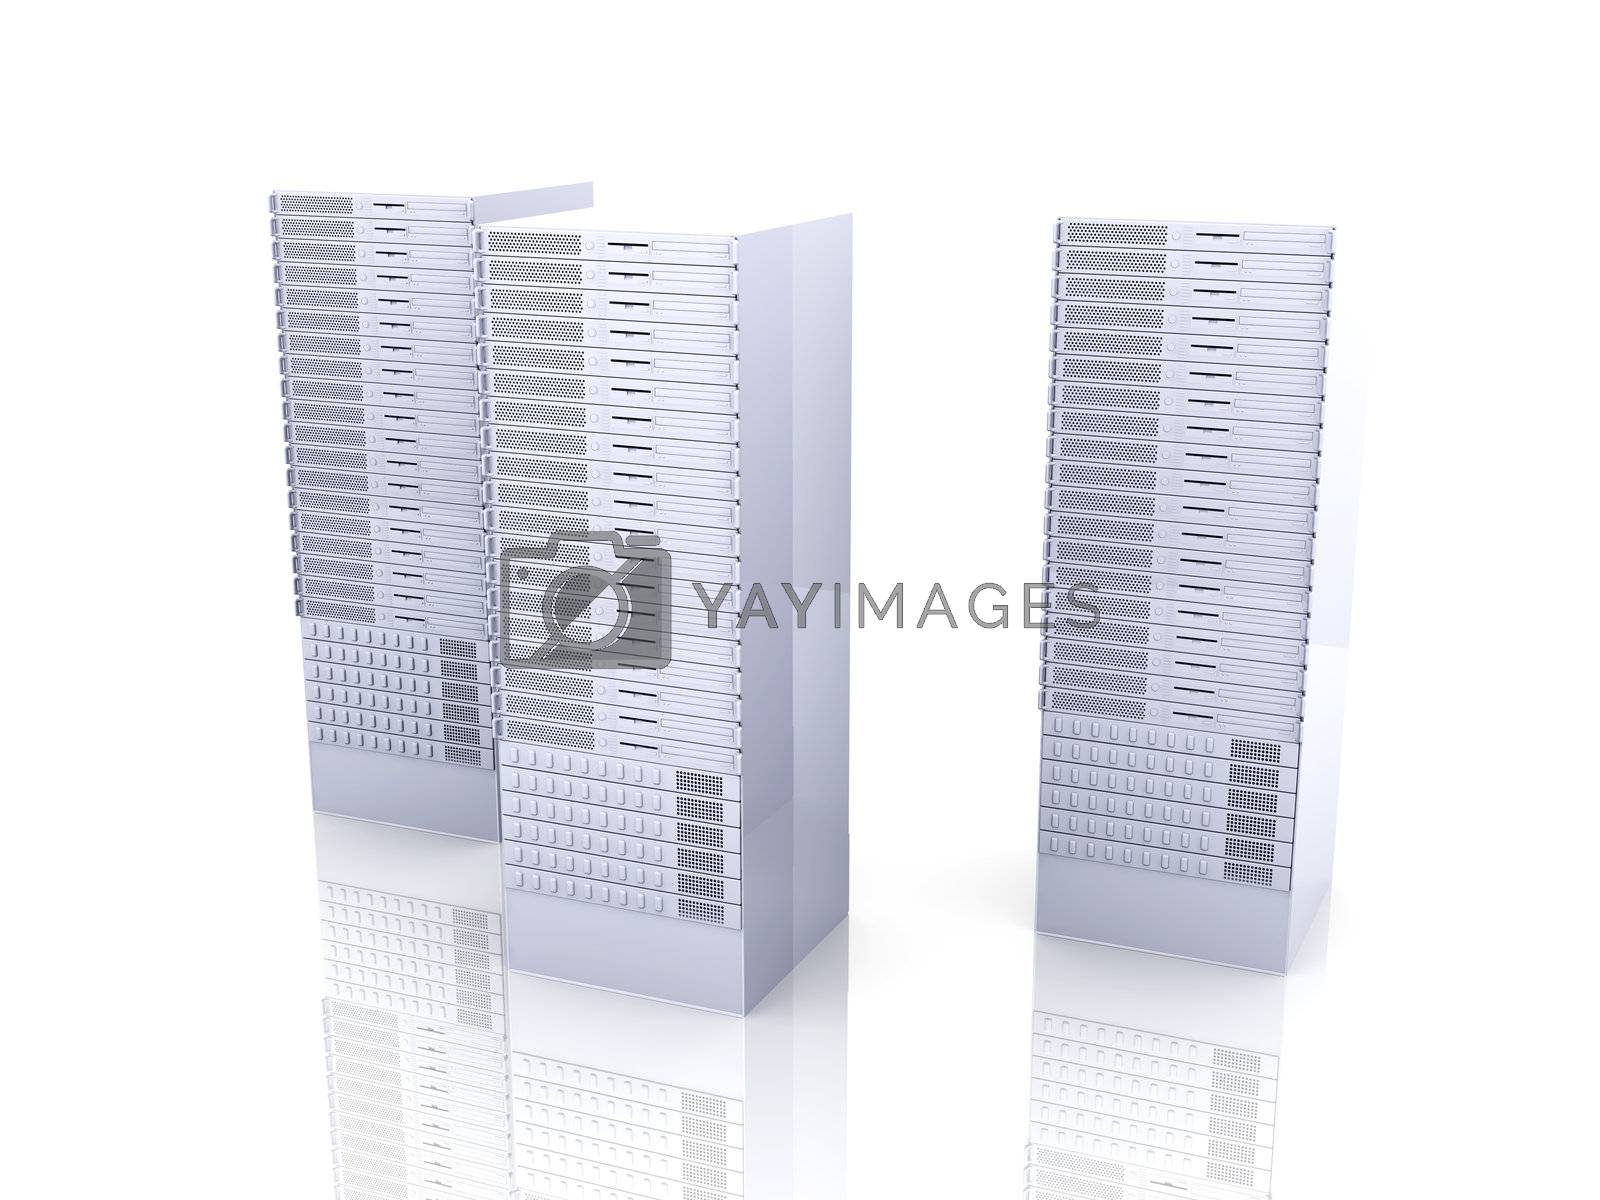 Royalty free image of 19inch Server towers by Spectral